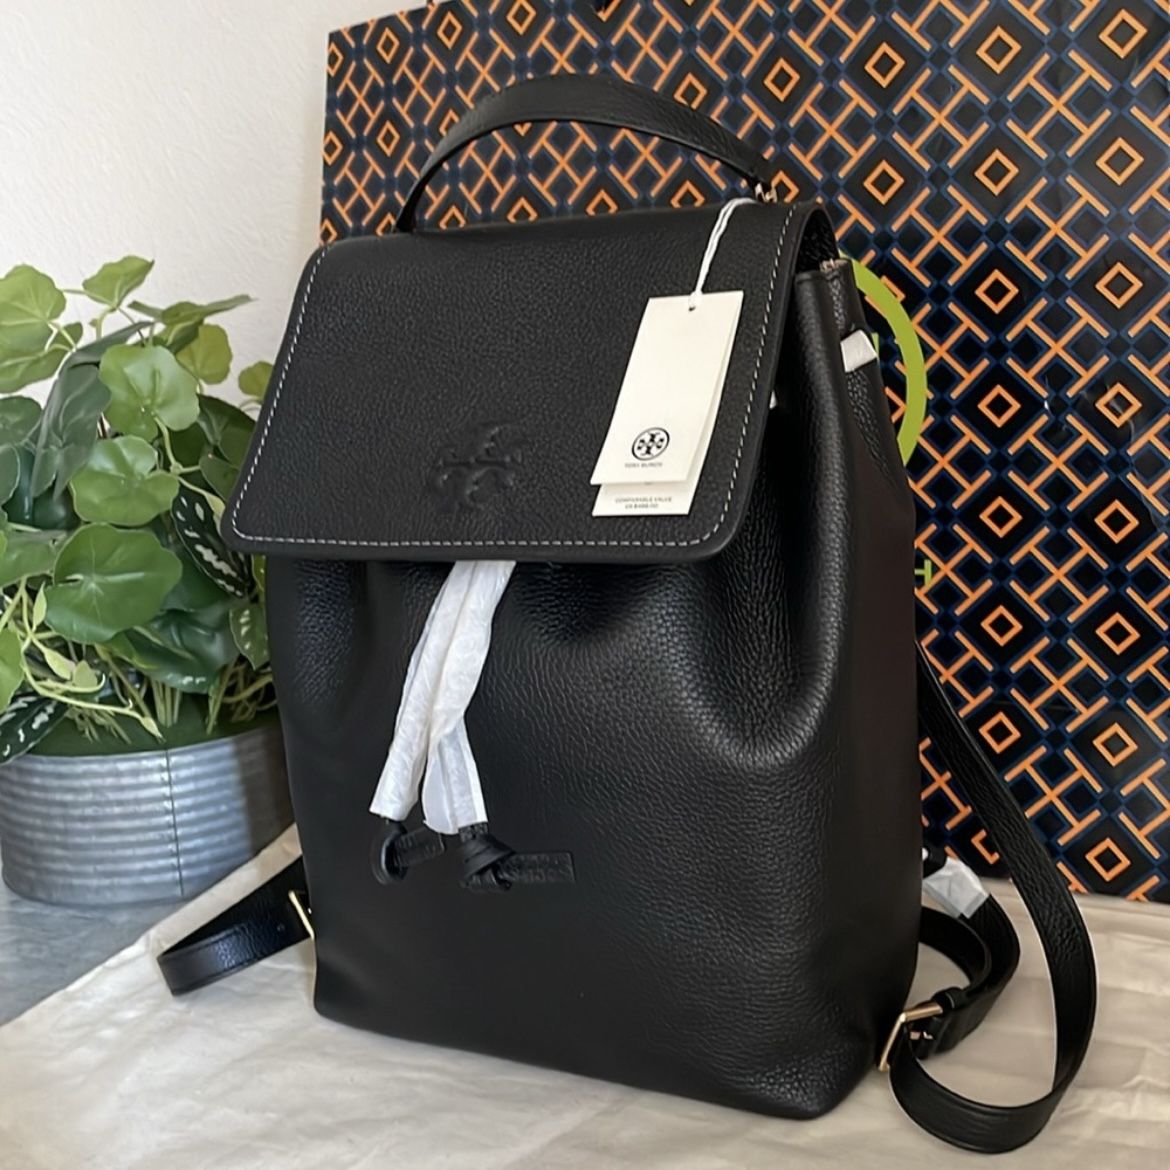 New✨ authentic tory burch thea backpack (large)